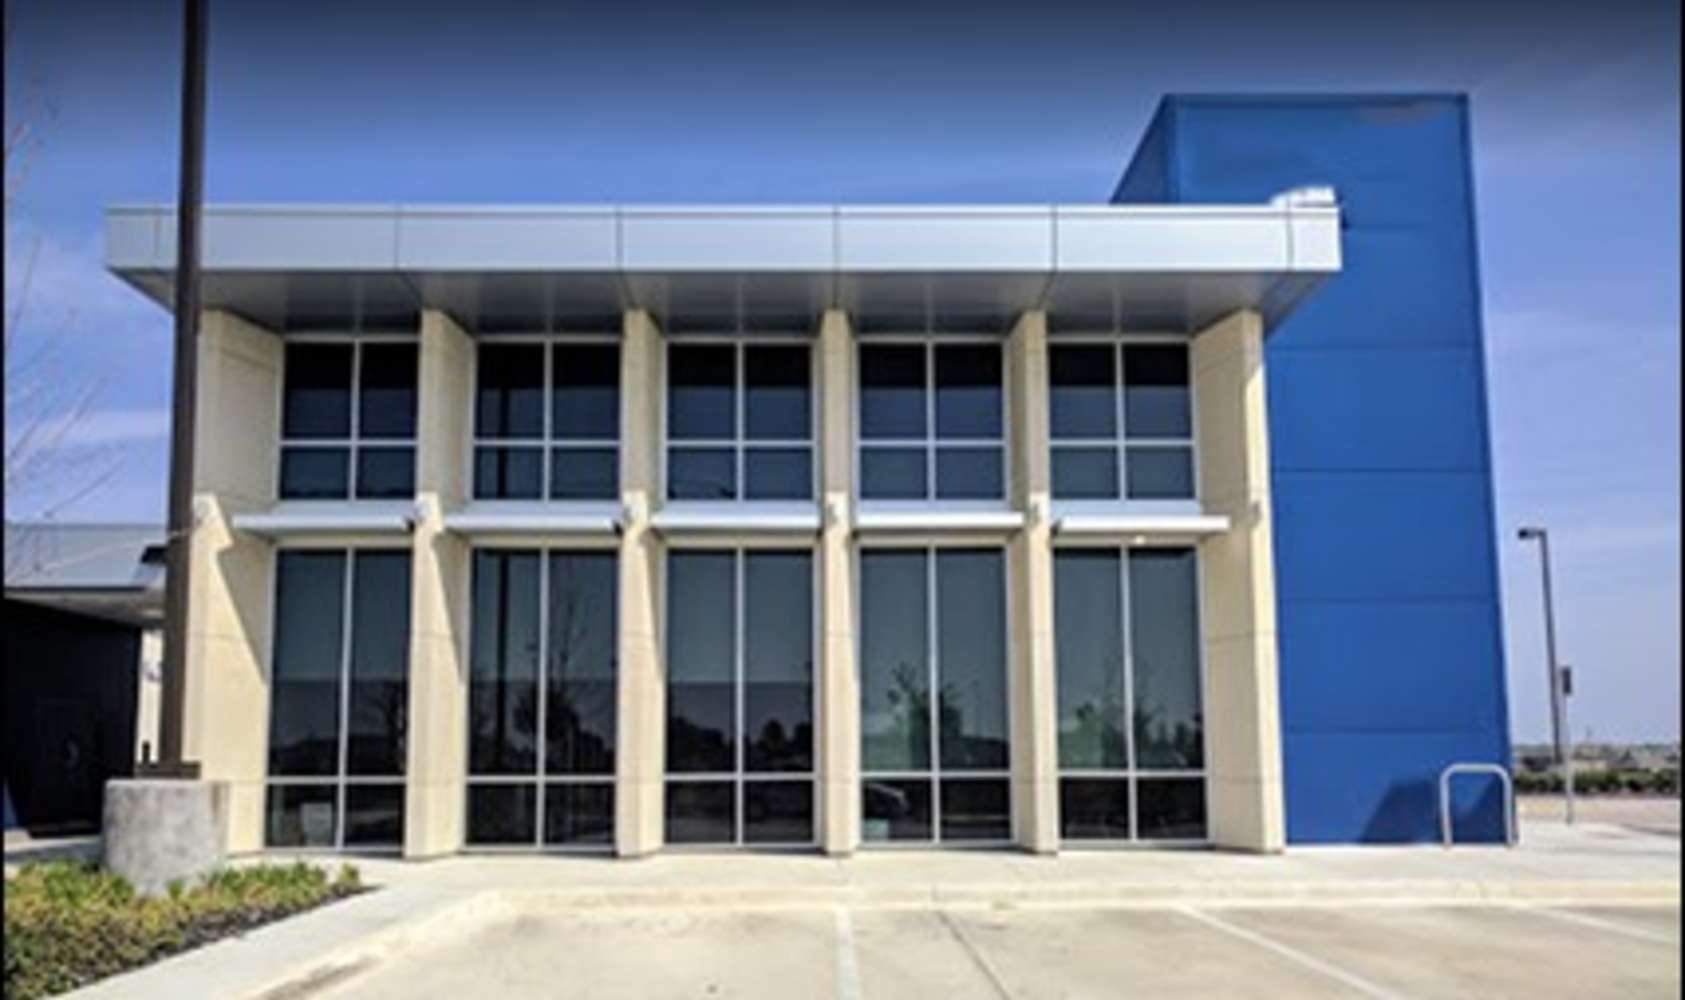 Retail Fort worth - Bank site for sublease - 8311837 - N TARRANT & QUAIL VALLEY - Fort Worth, TX